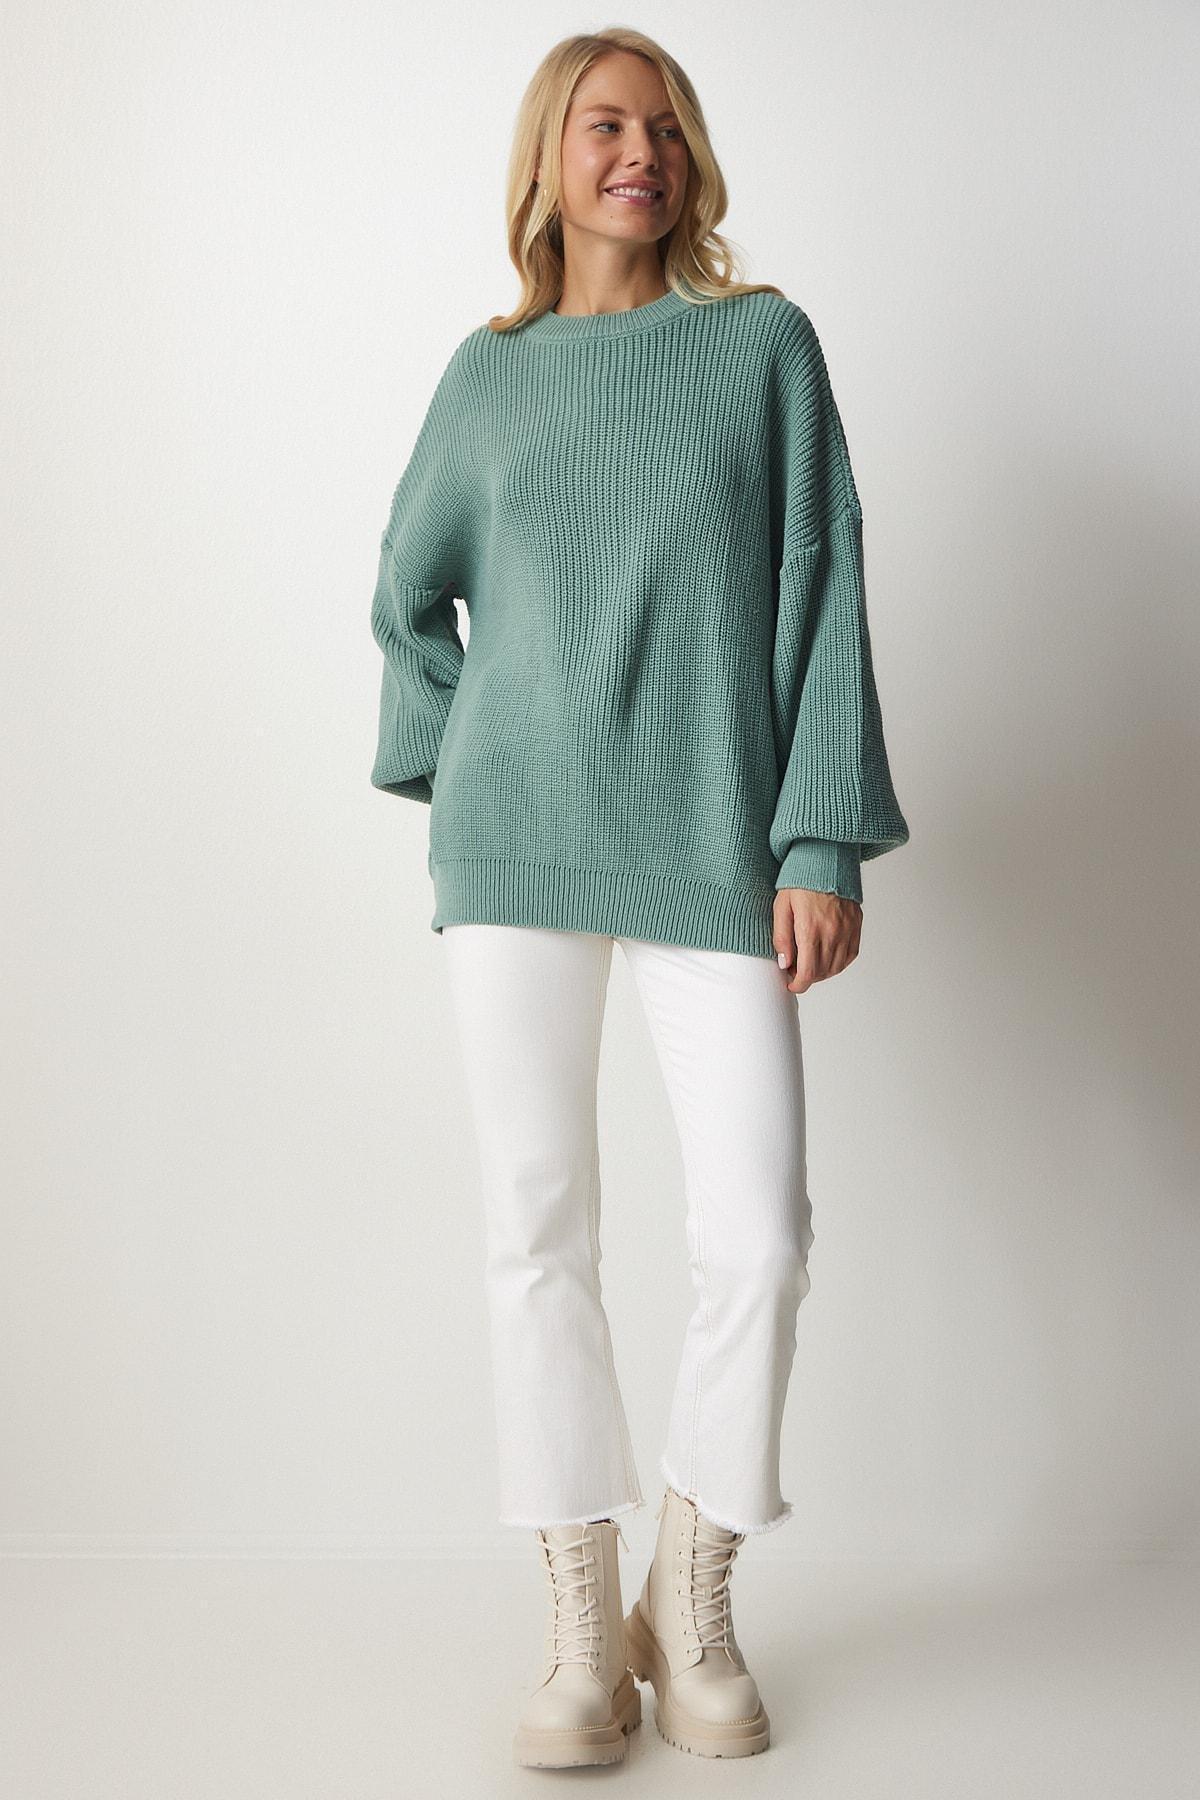 Happiness Istanbul - Turquoise Oversized Knitwear Sweater